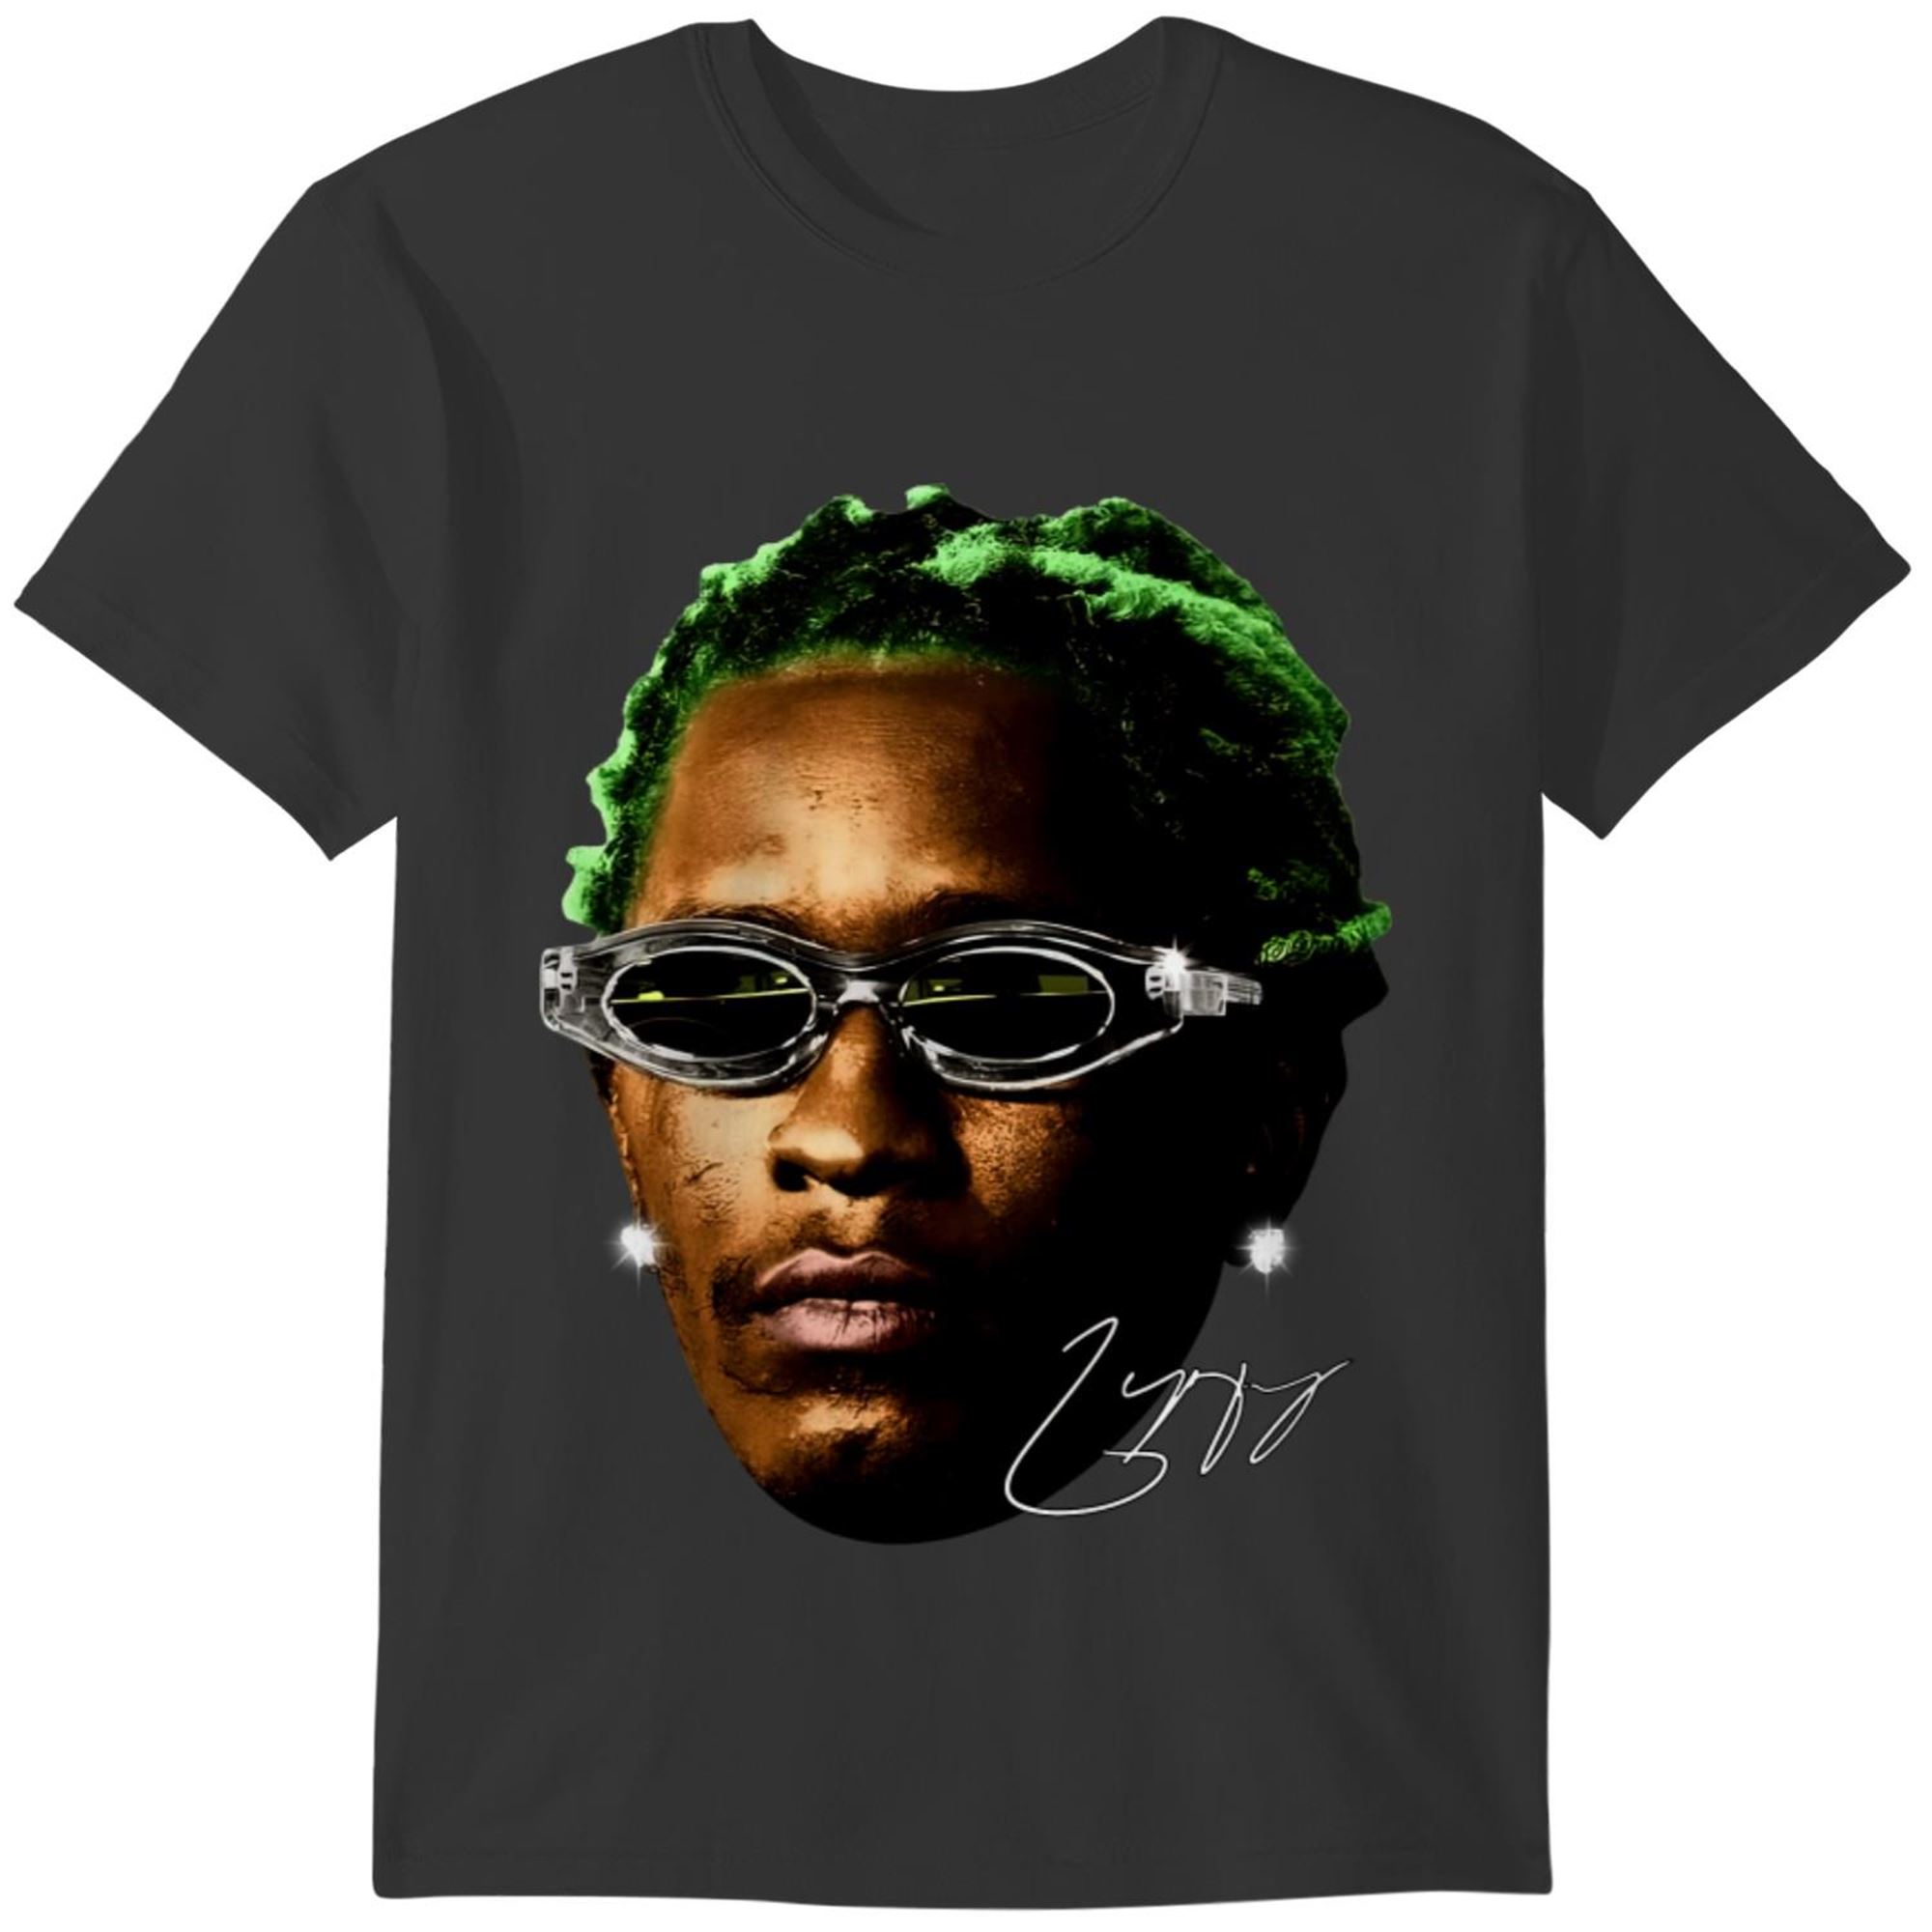 Young Thug T-shirt Exclusive Rap Tee For True Hip Hop Fans - Kanye Thugger Slime Season Edition Size Up To 5xl